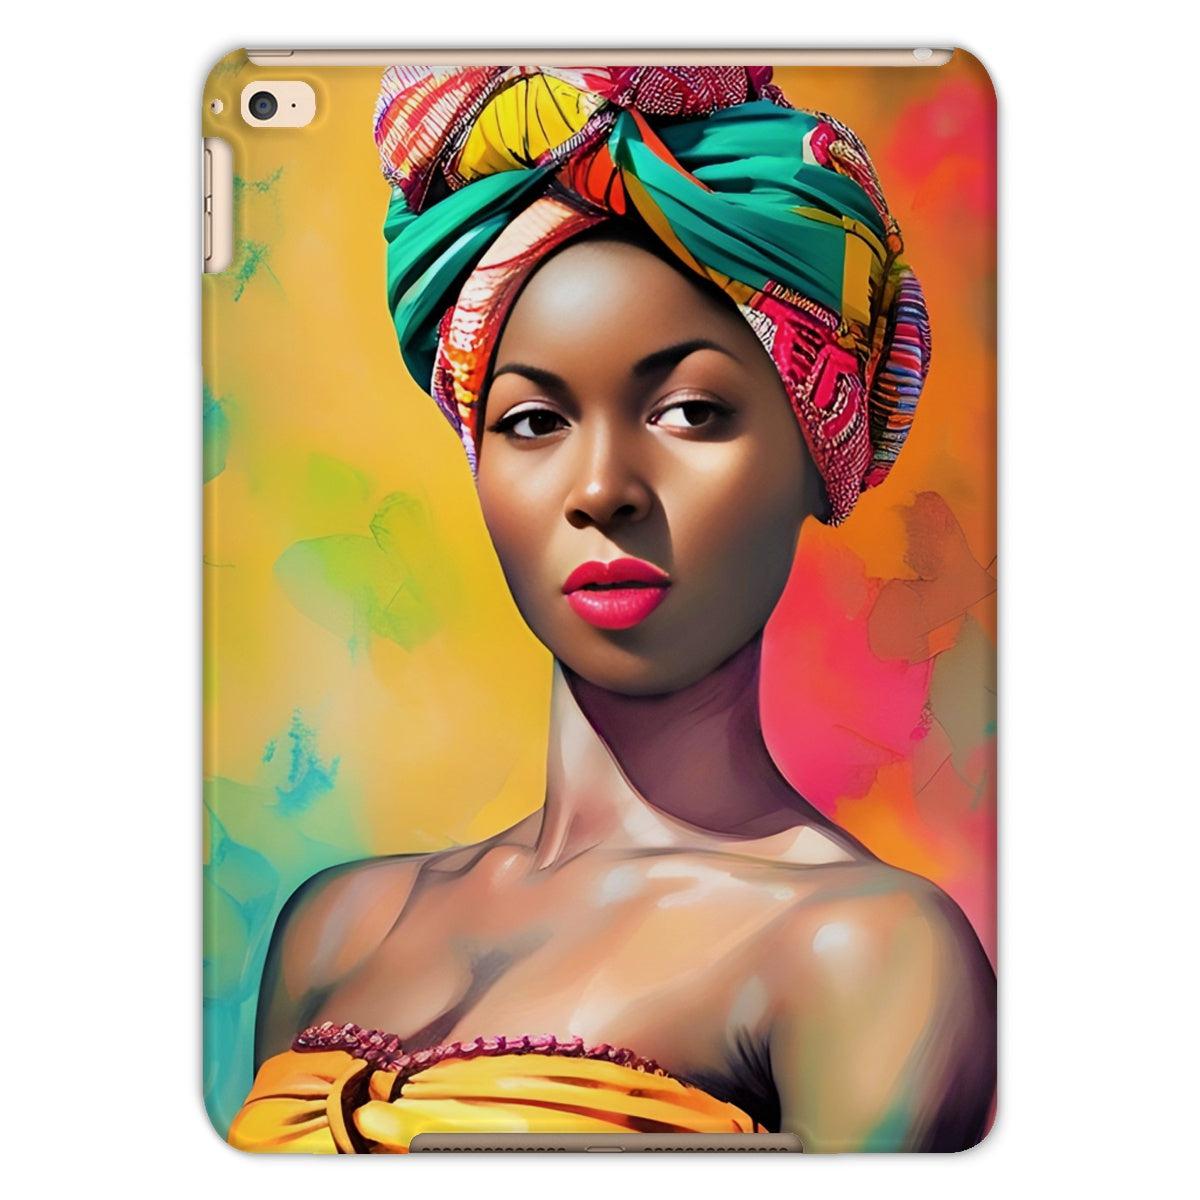 Goddess Good-Looking Tablet Cases